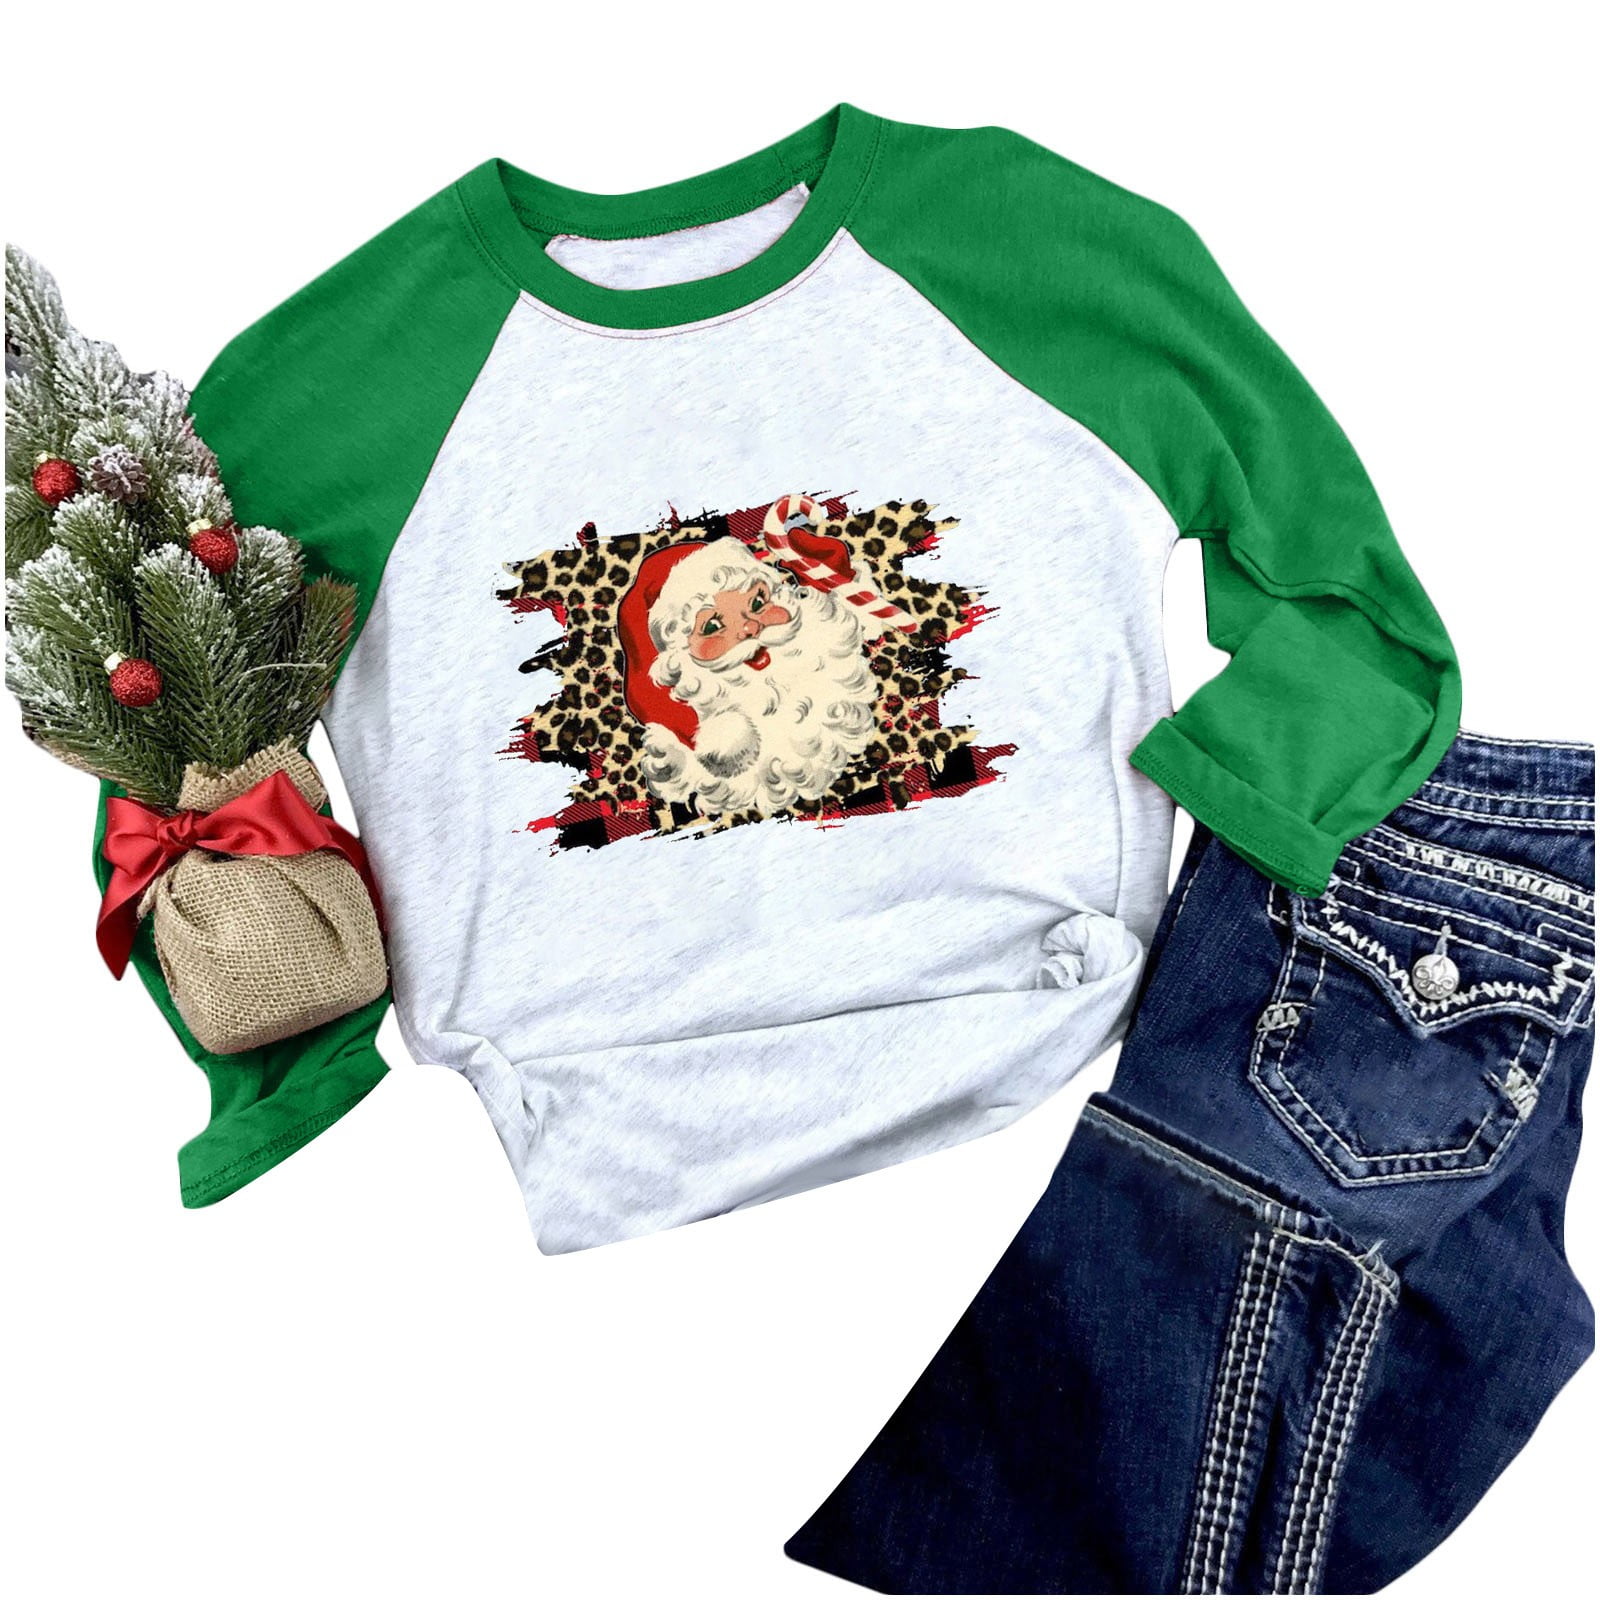 Manafest Classic Ugly Christmas Sweater